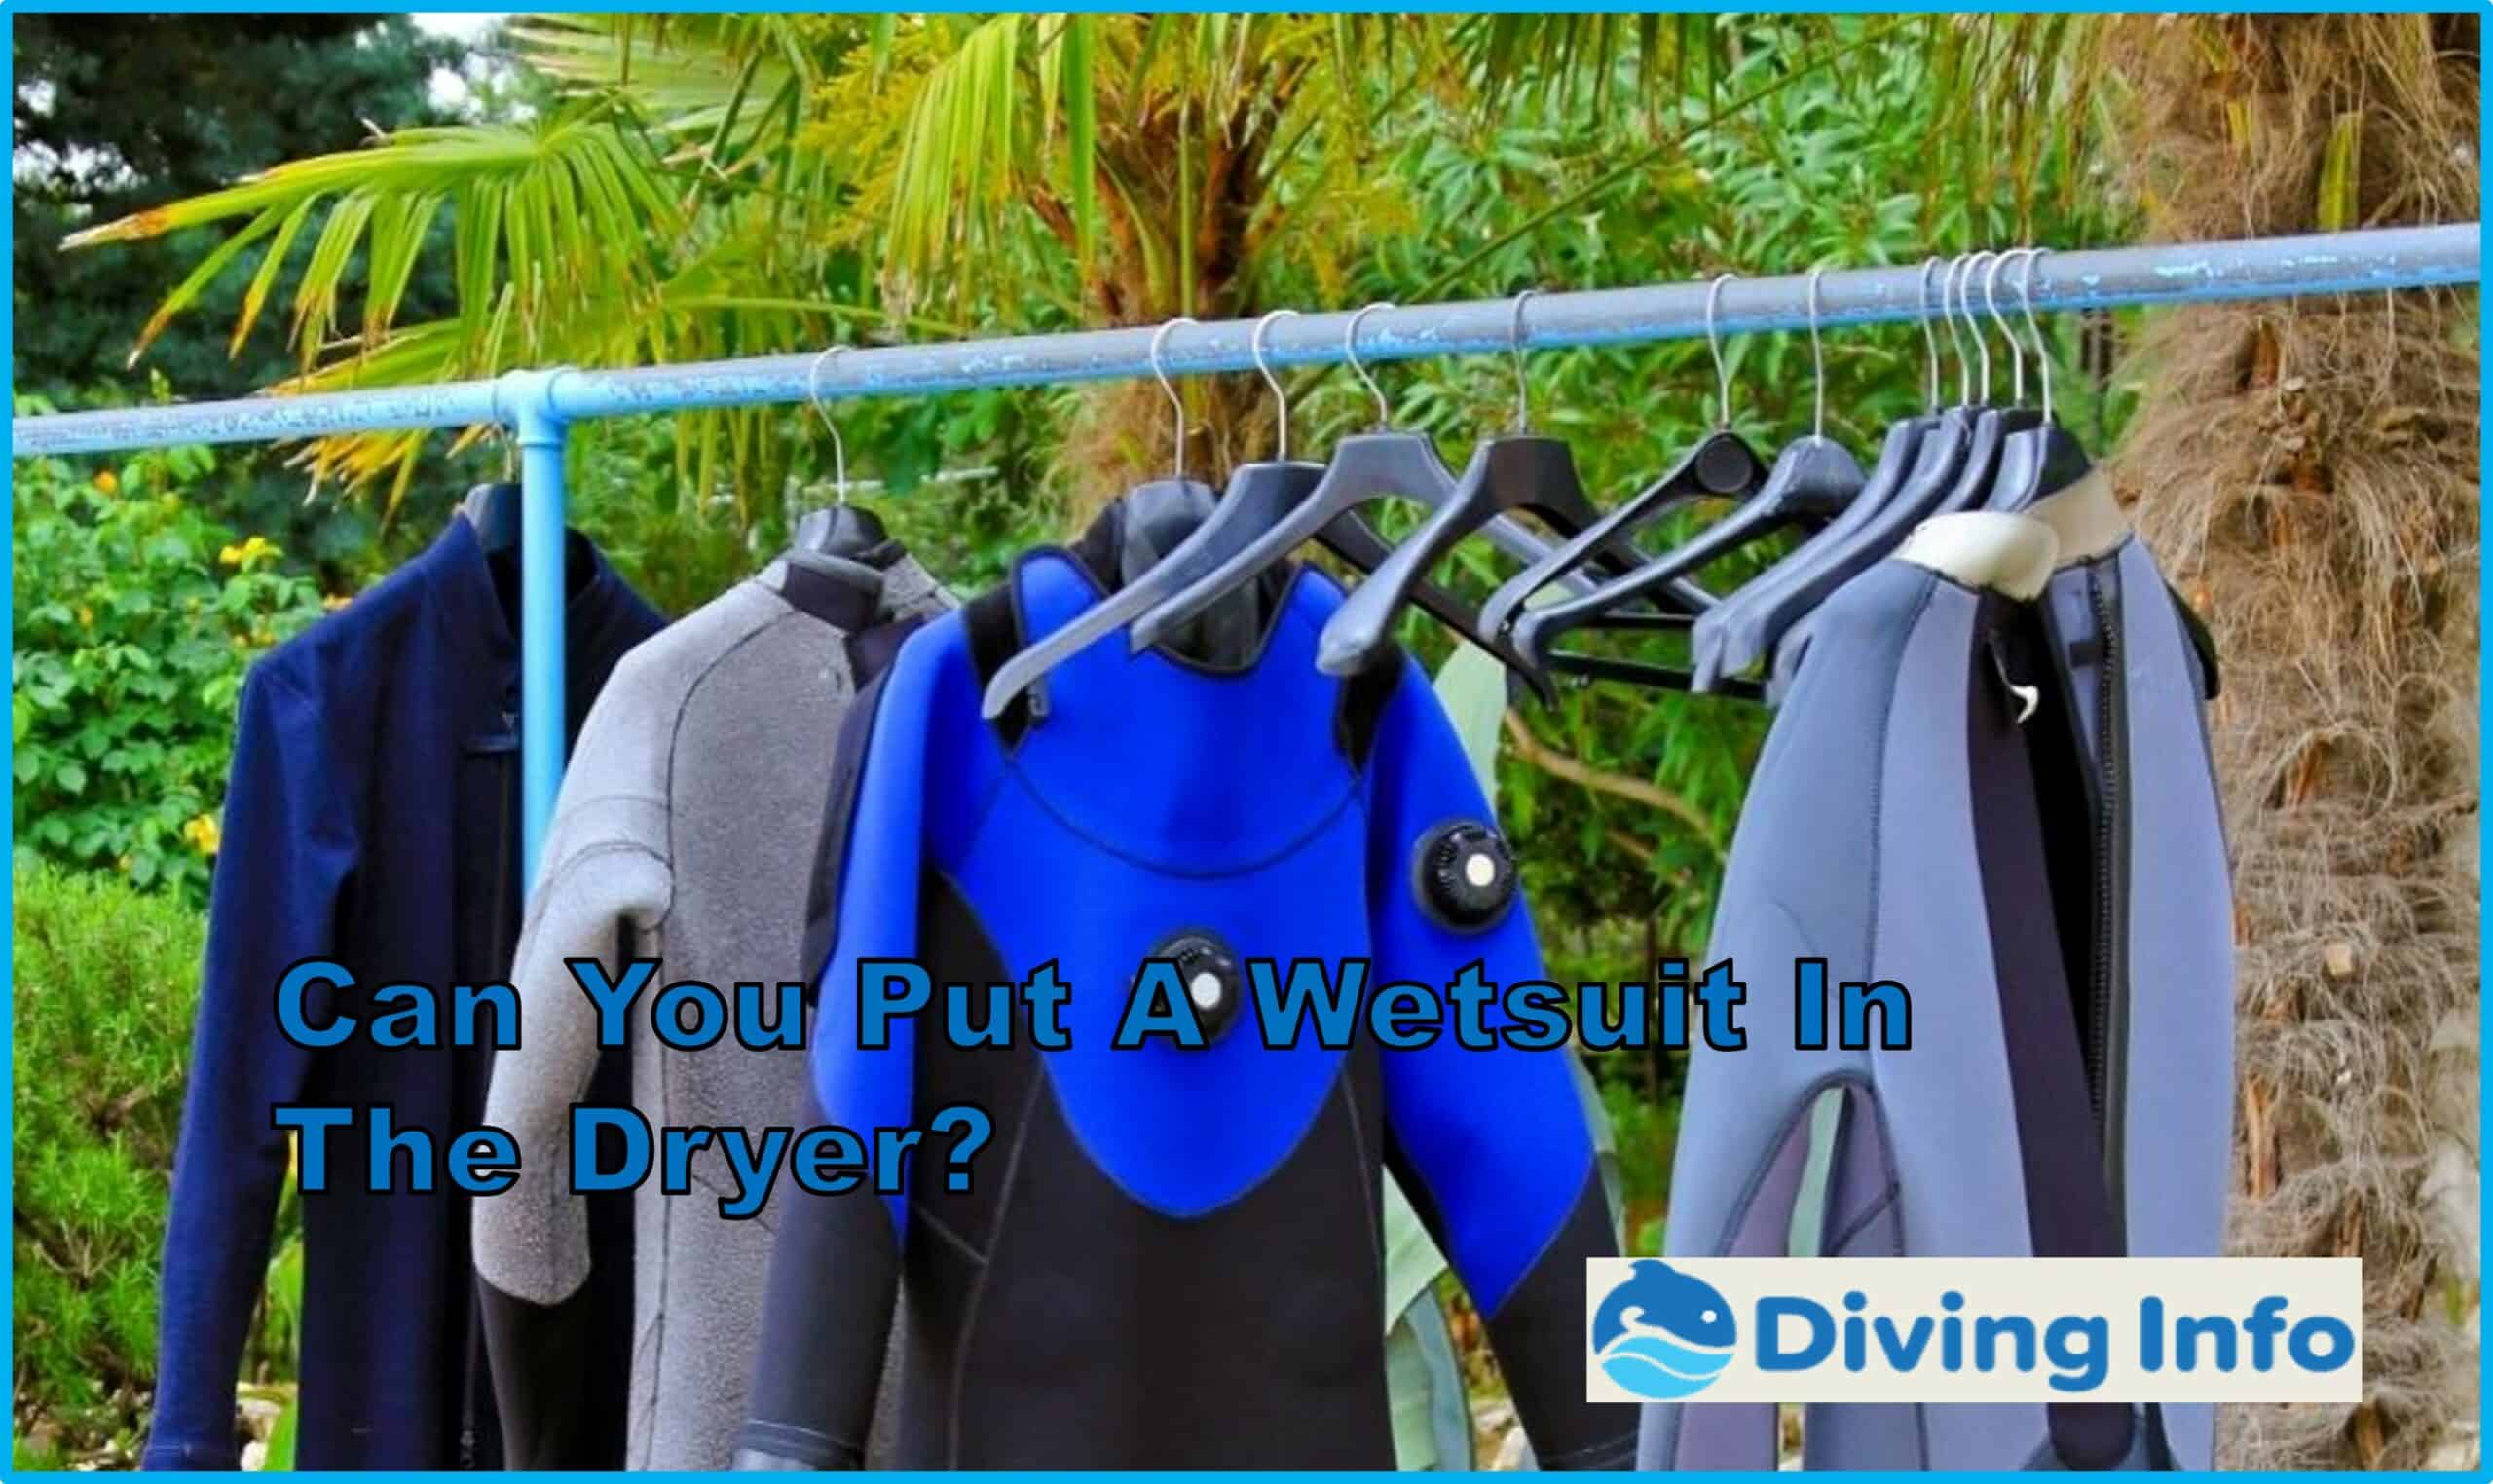 Can You Put A Wetsuit In The Dryer?